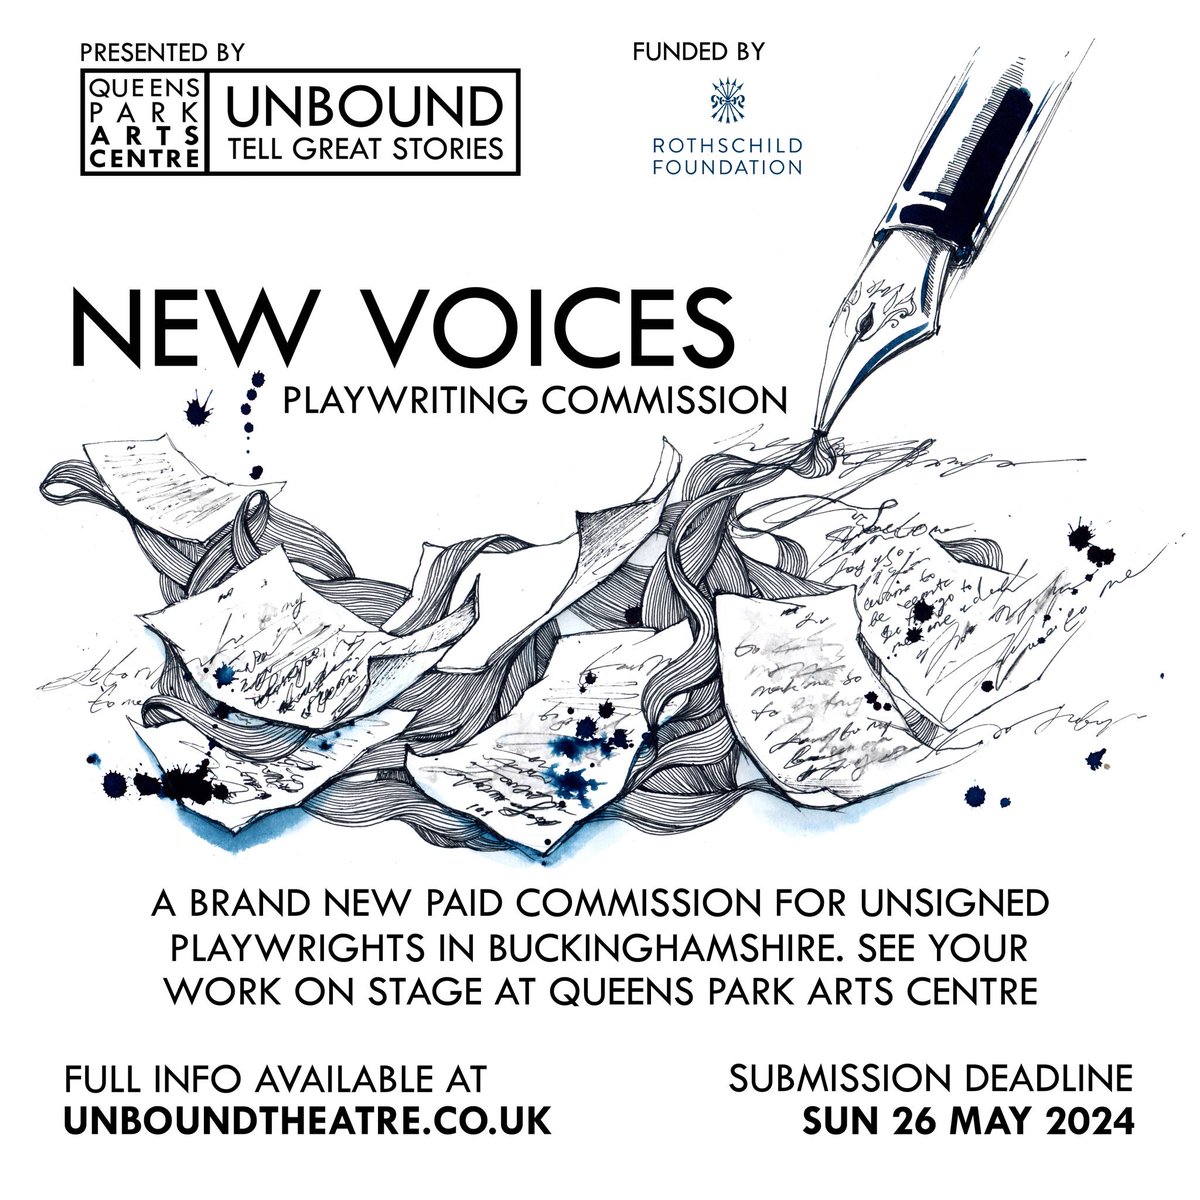 Deadline approaching! If you want to win a paid commission as a playwright and see your work staged at @queensparkarts, get your submission for our 'New Voices' writing opportunity in by Sun 26 May! Open to writers based in Bucks. Info: unboundtheatre.co.uk/new-voices-com…

#TellGreatStories